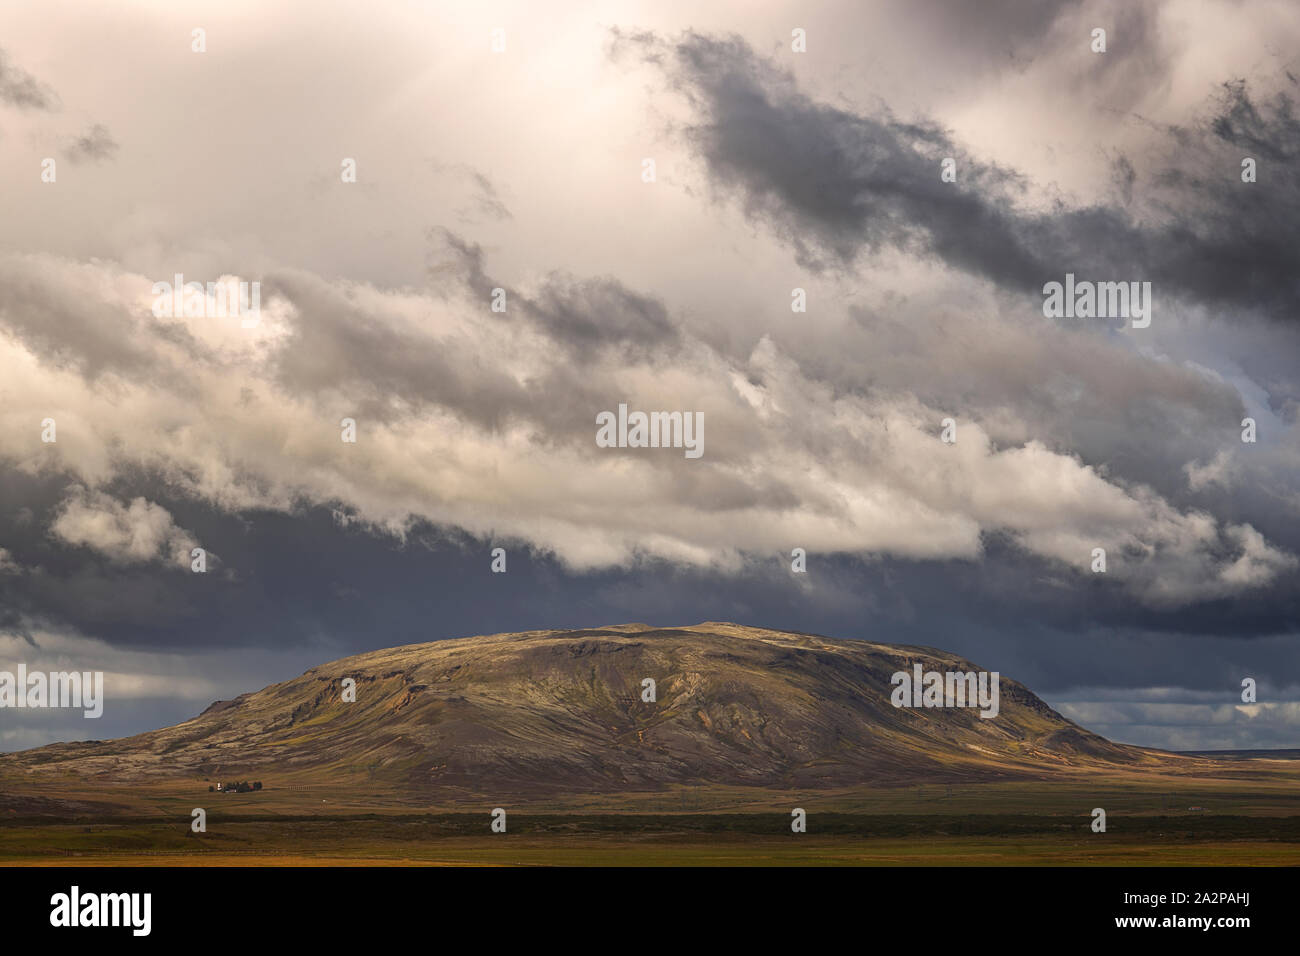 Beautiful Clouds on Top of a Mountain Landscape in Iceland Stock Photo